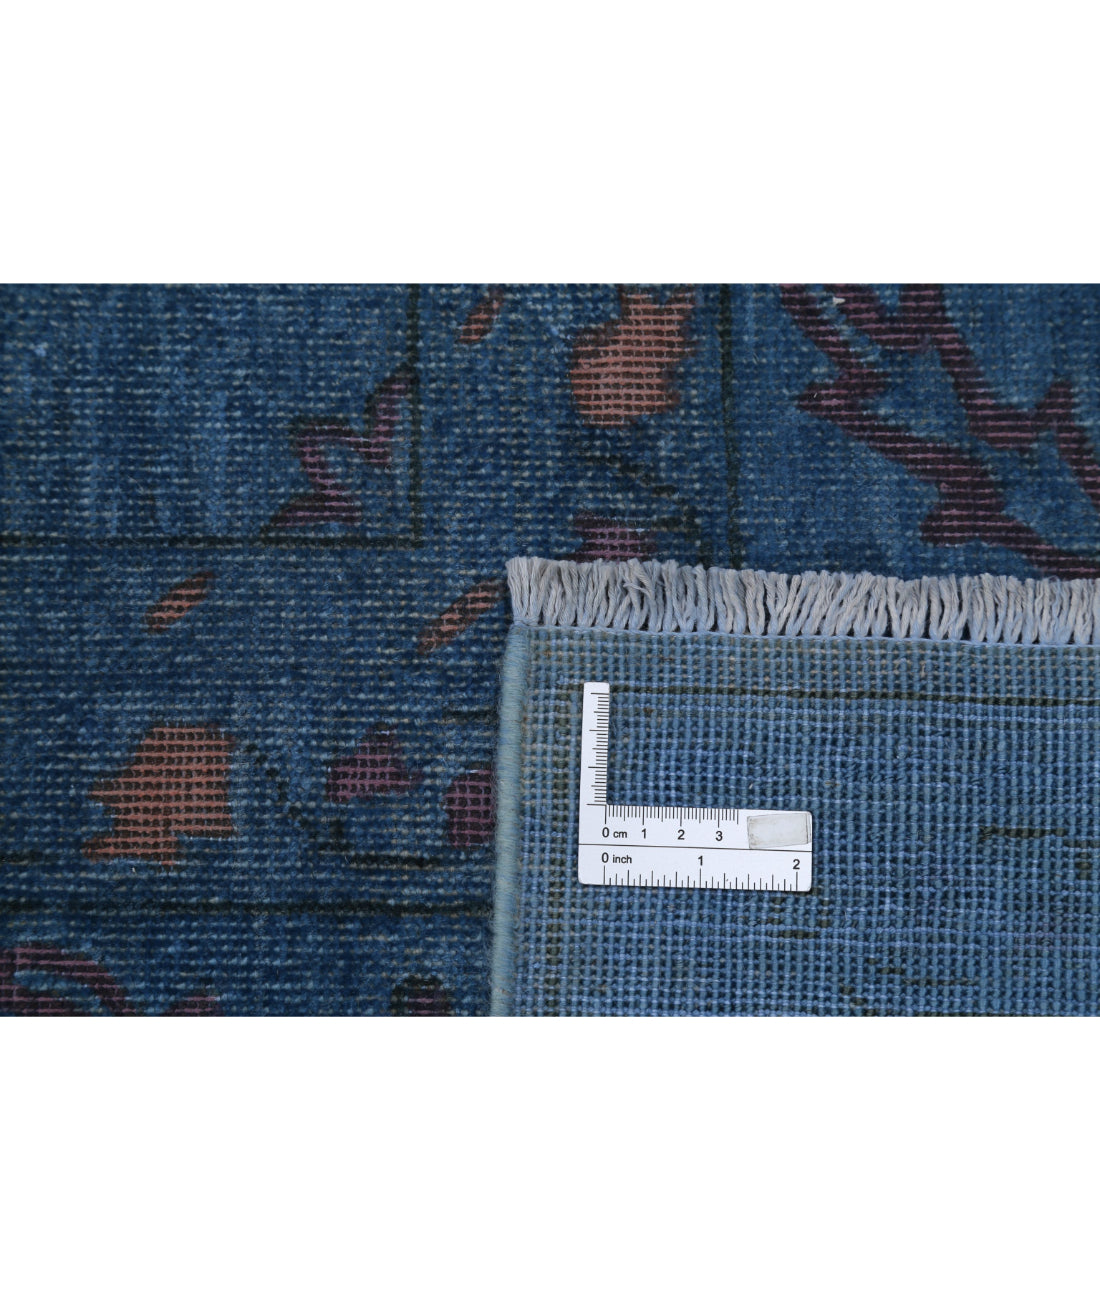 Hand Knotted Onyx Wool Rug - 7'8'' x 9'9'' 7'8'' x 9'9'' (230 X 293) / Blue / Blue